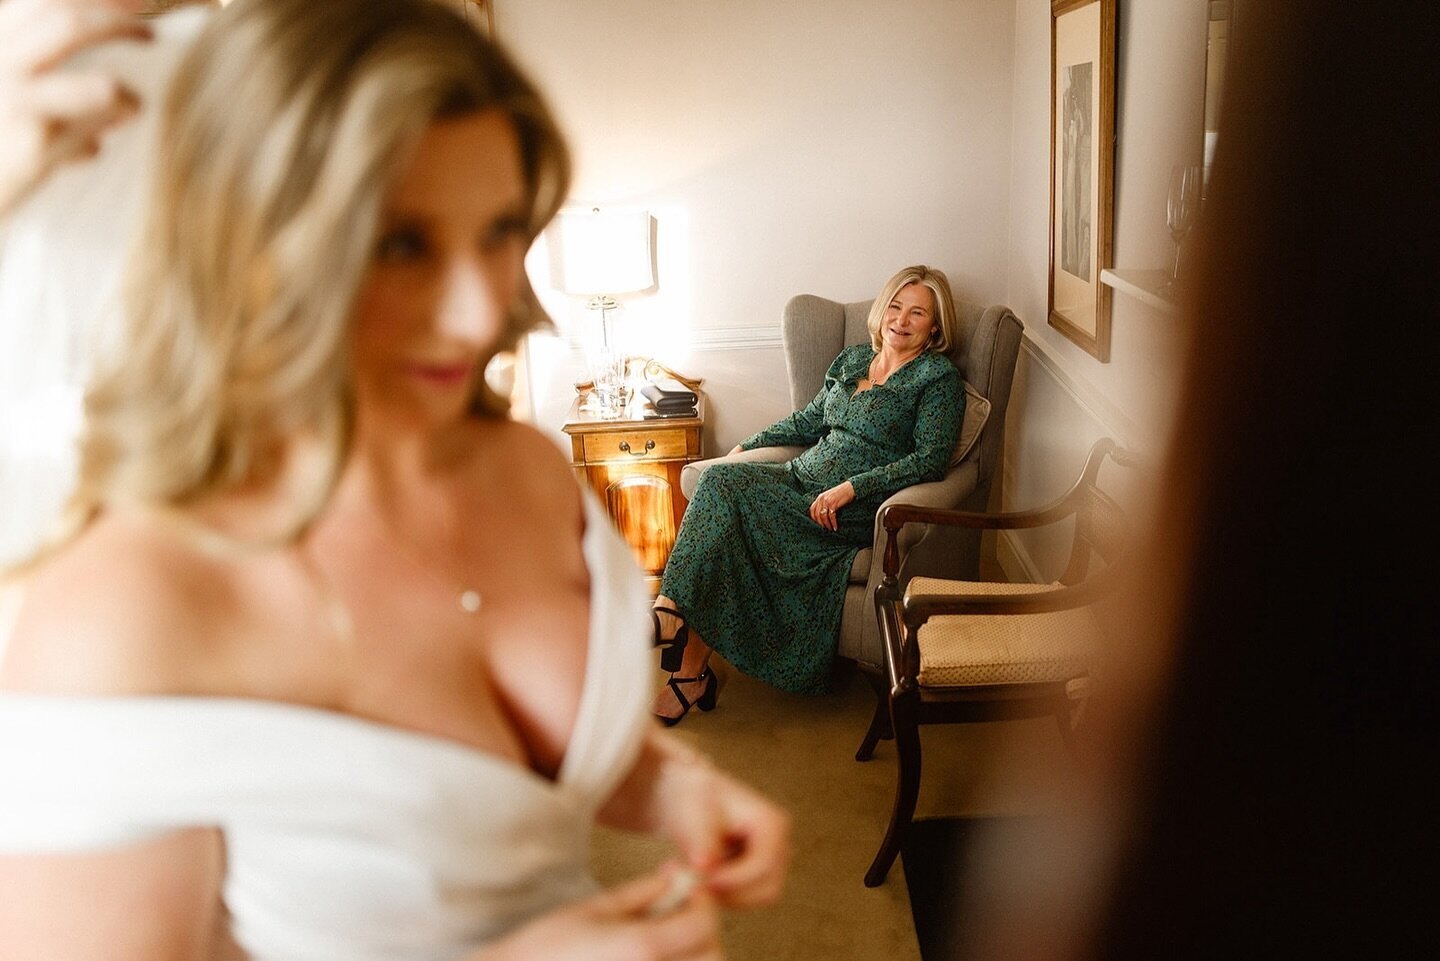 Happy Mother&rsquo;s Day to all of the wonderful Mammy&rsquo;s. 

Love this photo of Julie on her wedding day with her Mum, Sarah watching on. A special moment captured by @davidmcclellandphotography 

#cloughjordanhouse #happymothersday #mothersday 